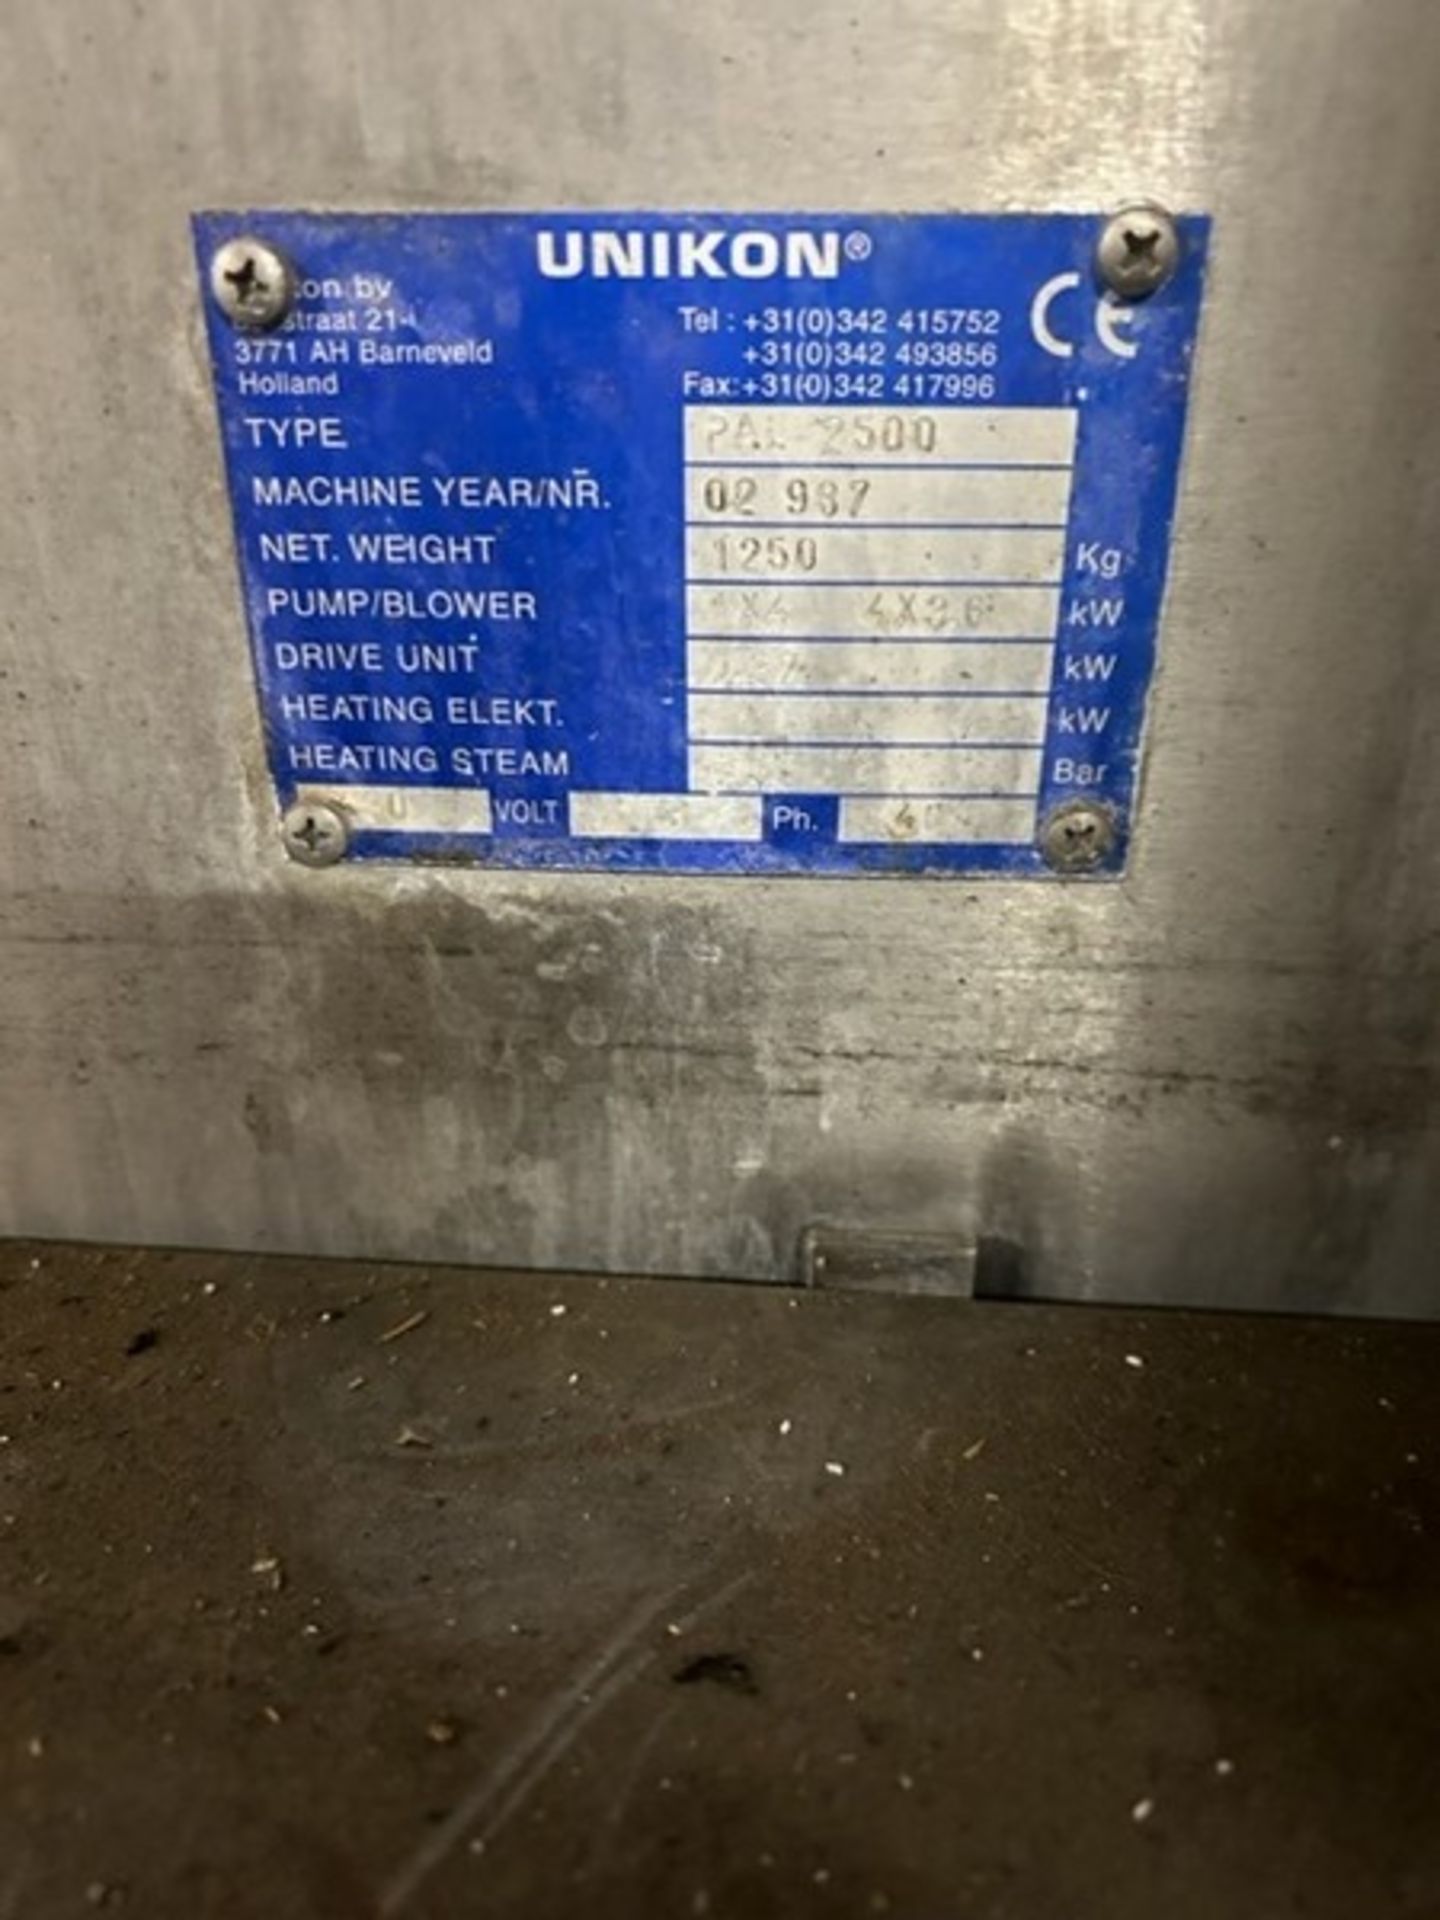 Unikon S/S Pallet Washer, Type PAL2500, Machine Yr/Nr. 02 937 (Loading Fee $1,250 USD) (Located - Image 3 of 3